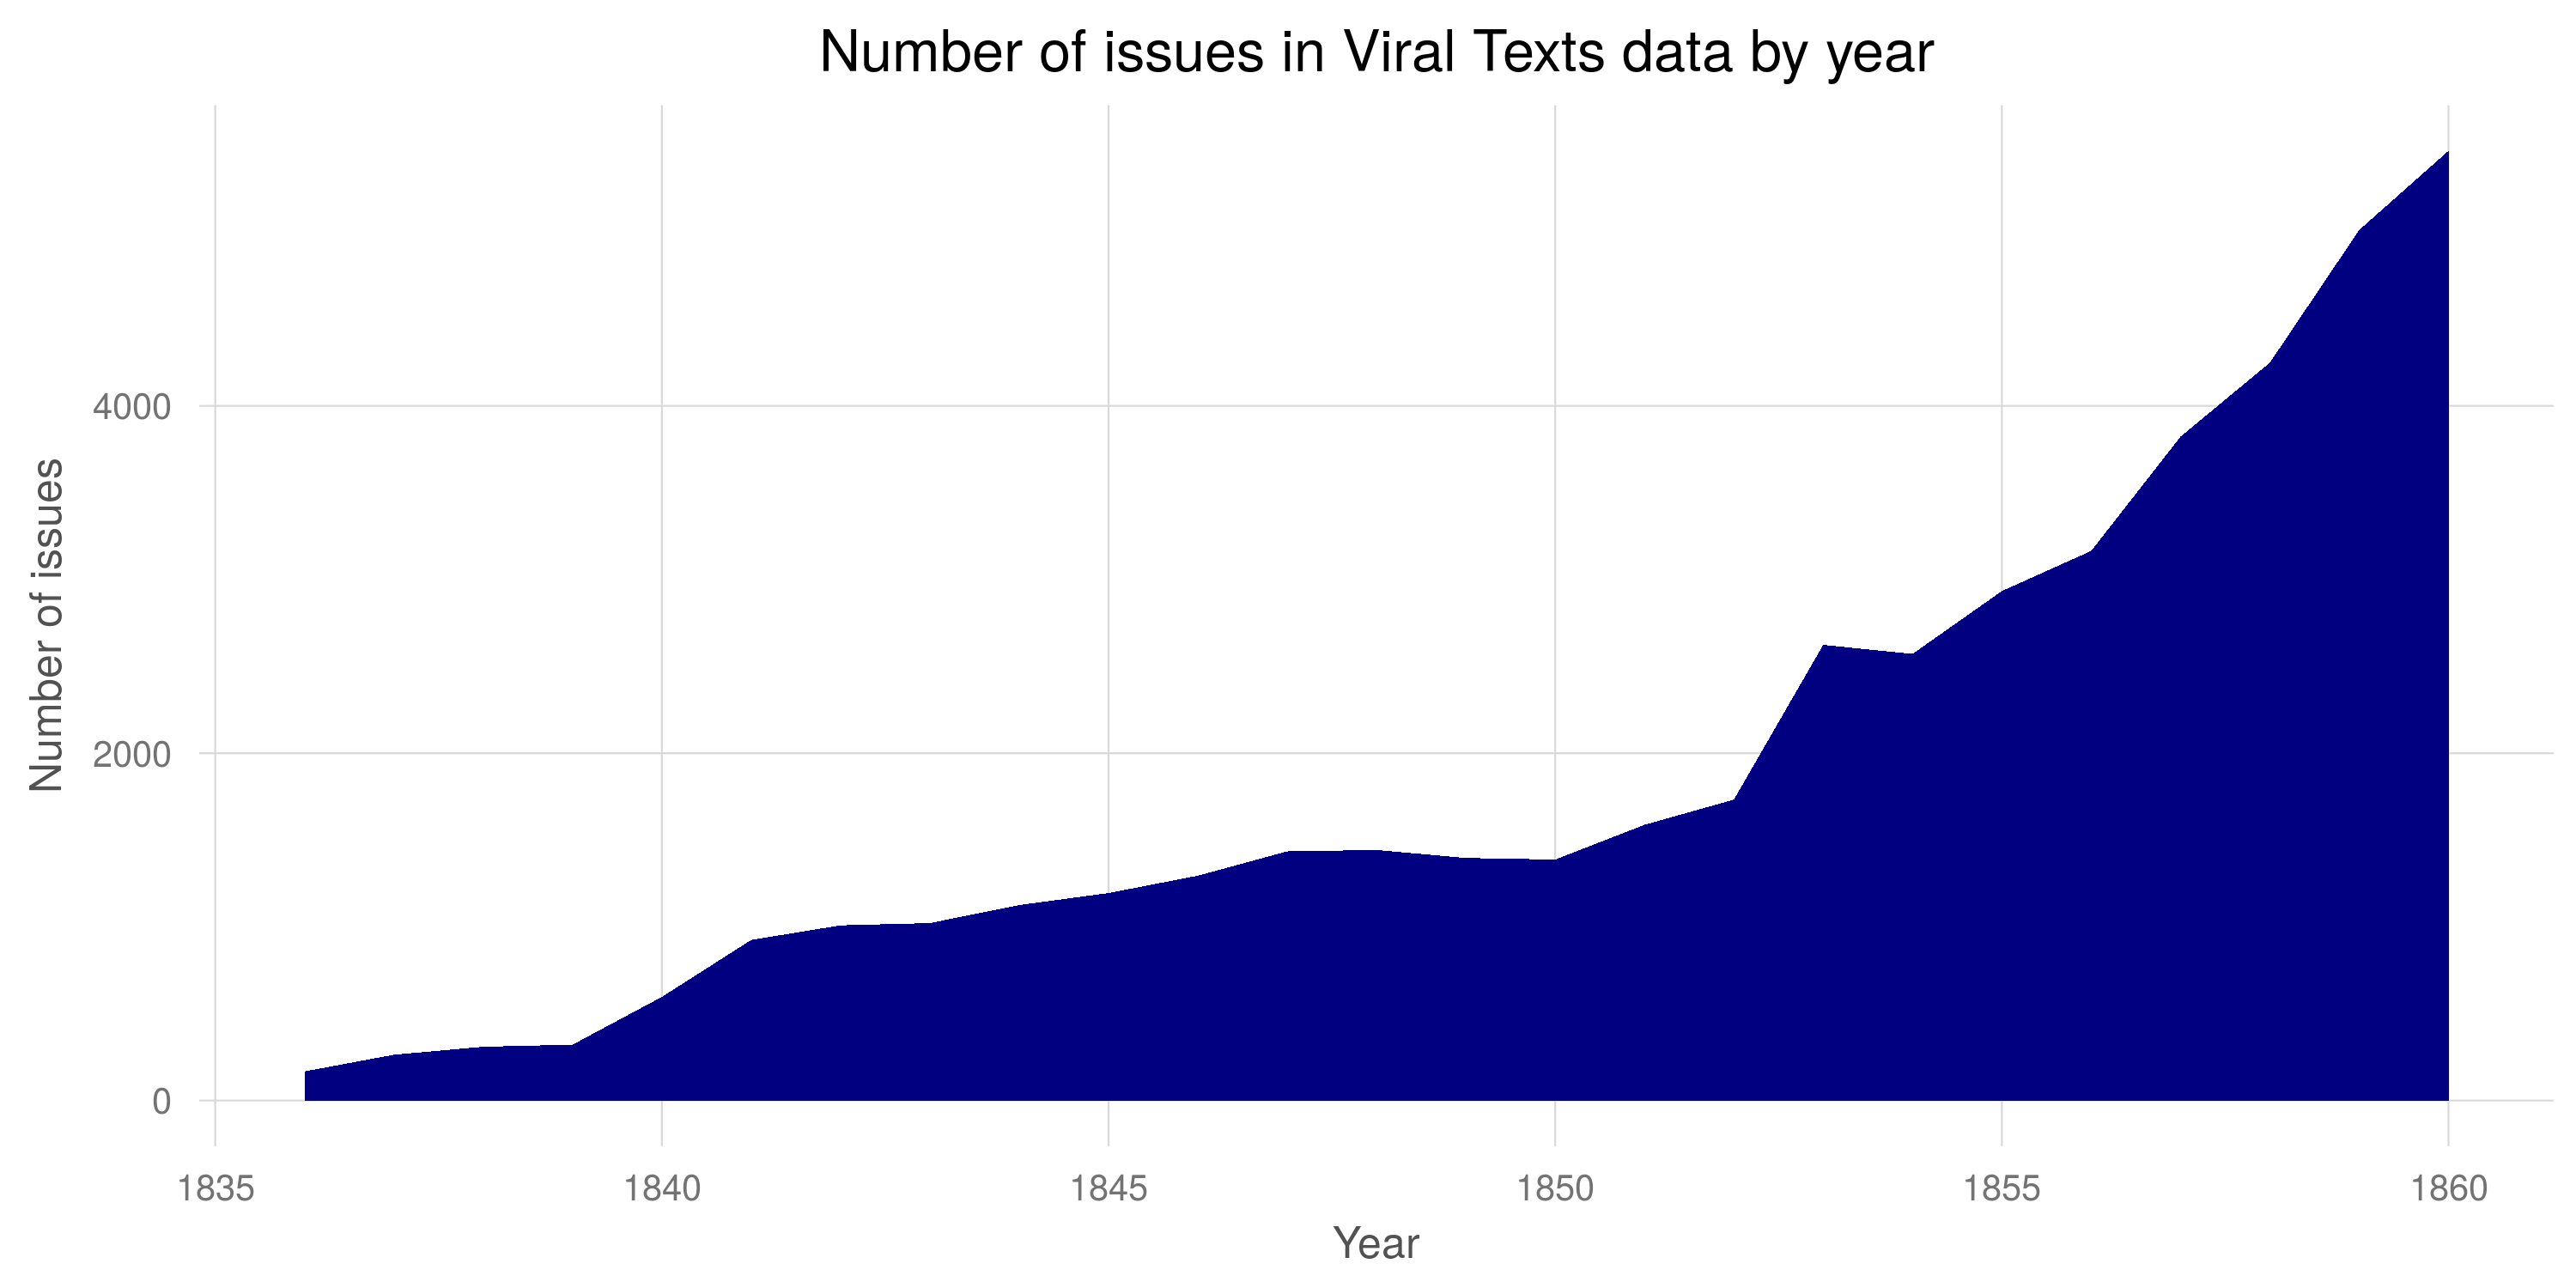 Number of issues in Viral Texts data by year.